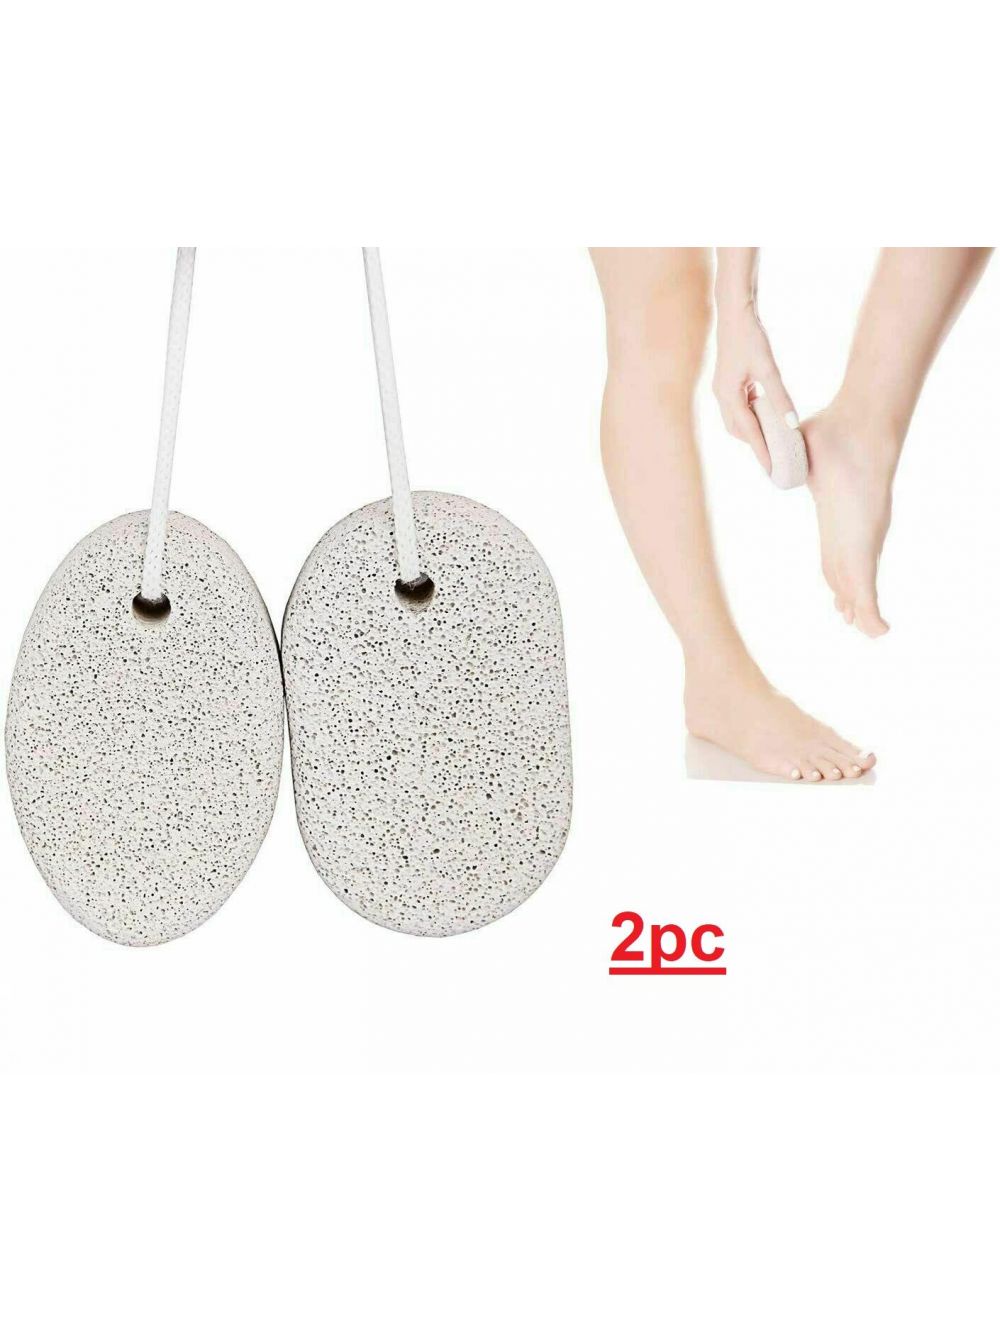 Shower Foot Scrubber Massager Cleaner Spa Exfoliating Washer Wash Slipper  Tools Bathroom, Beauty & Personal Care, Bath & Body, Bath on Carousell